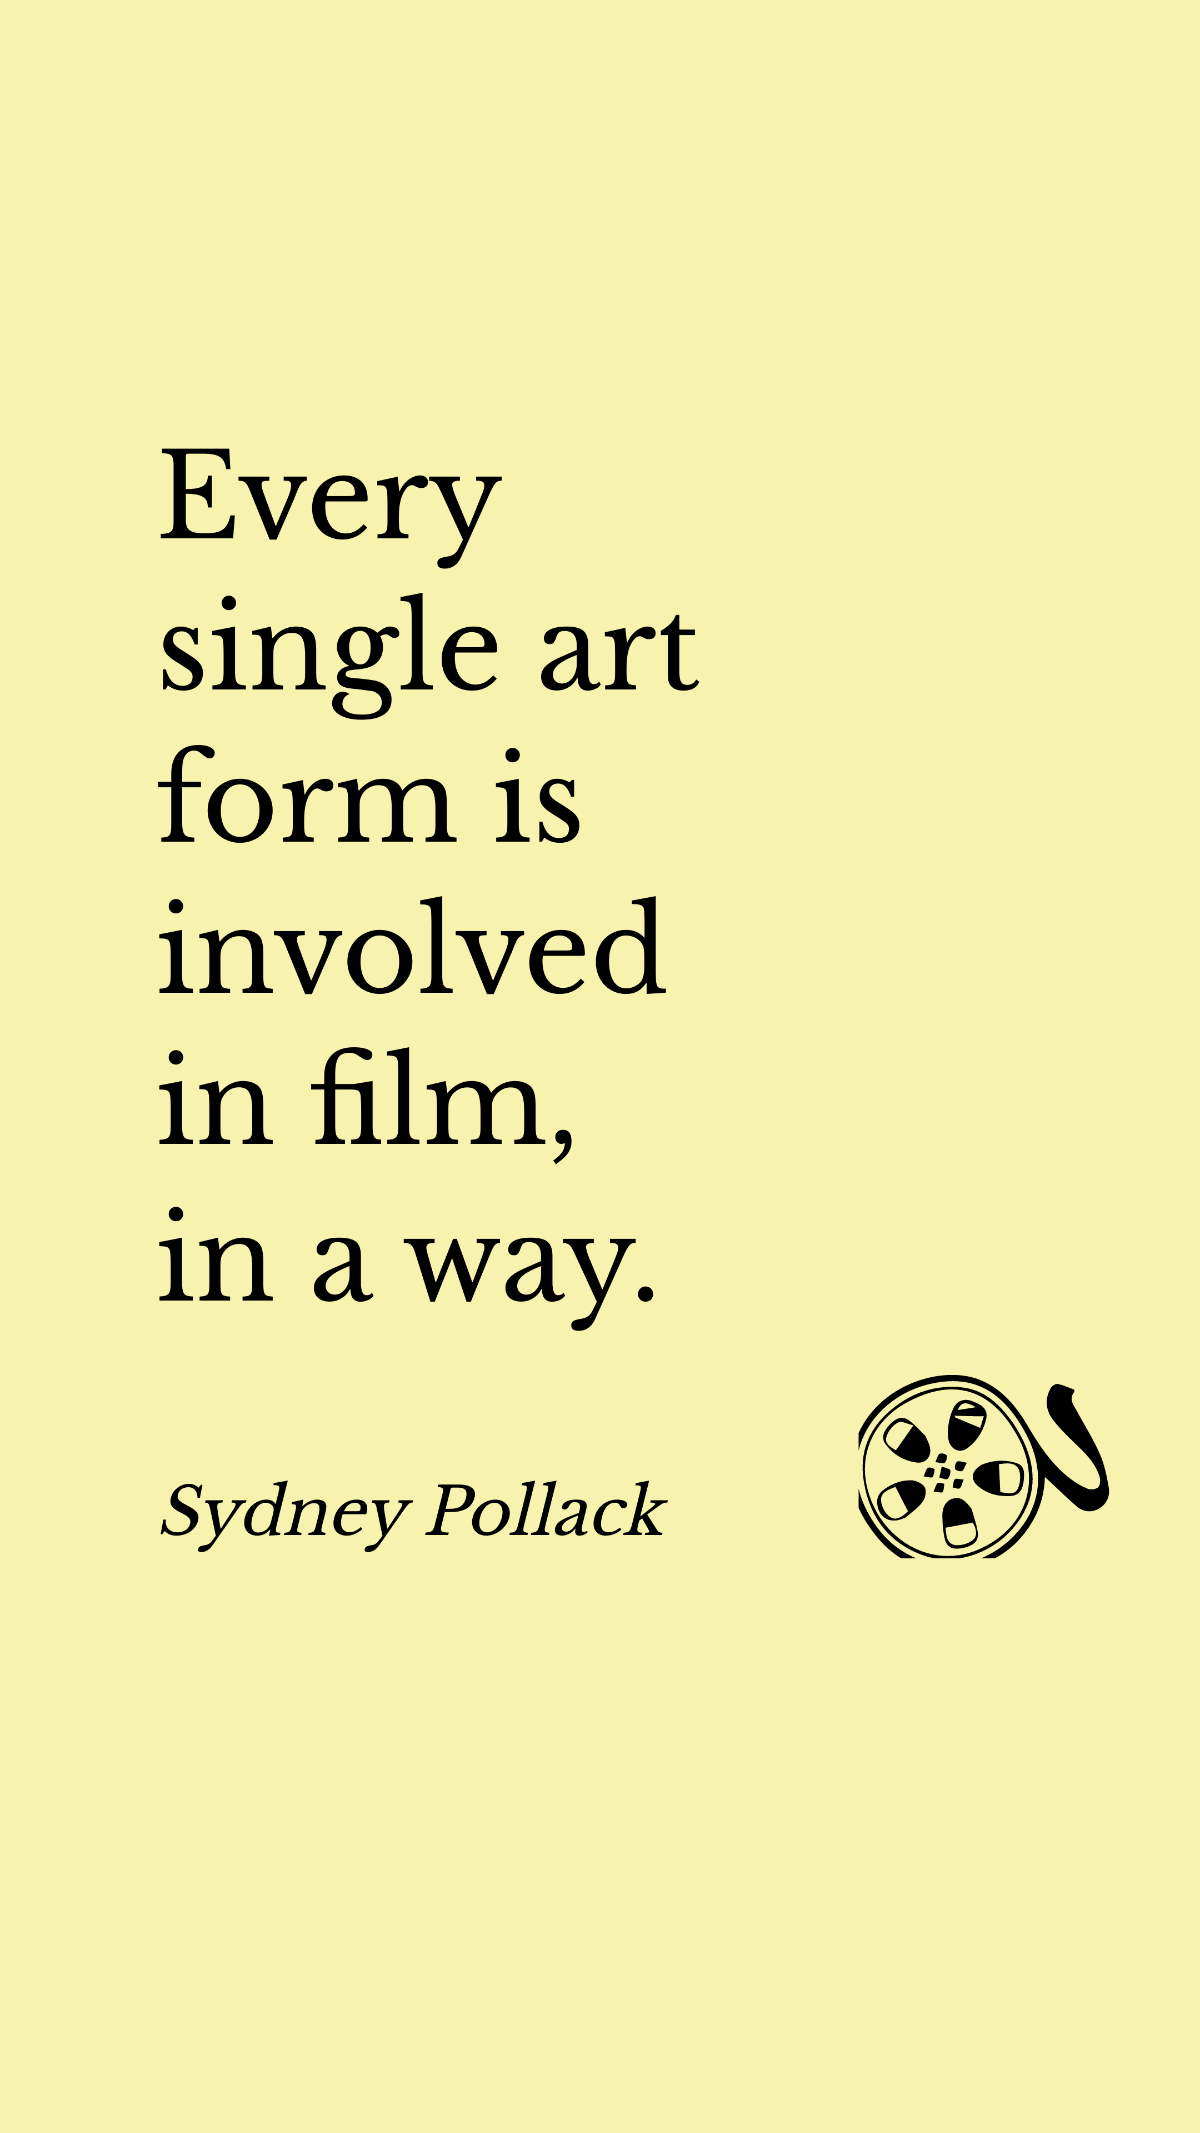 Free Sydney Pollack - Every single art form is involved in film, in a way. Template